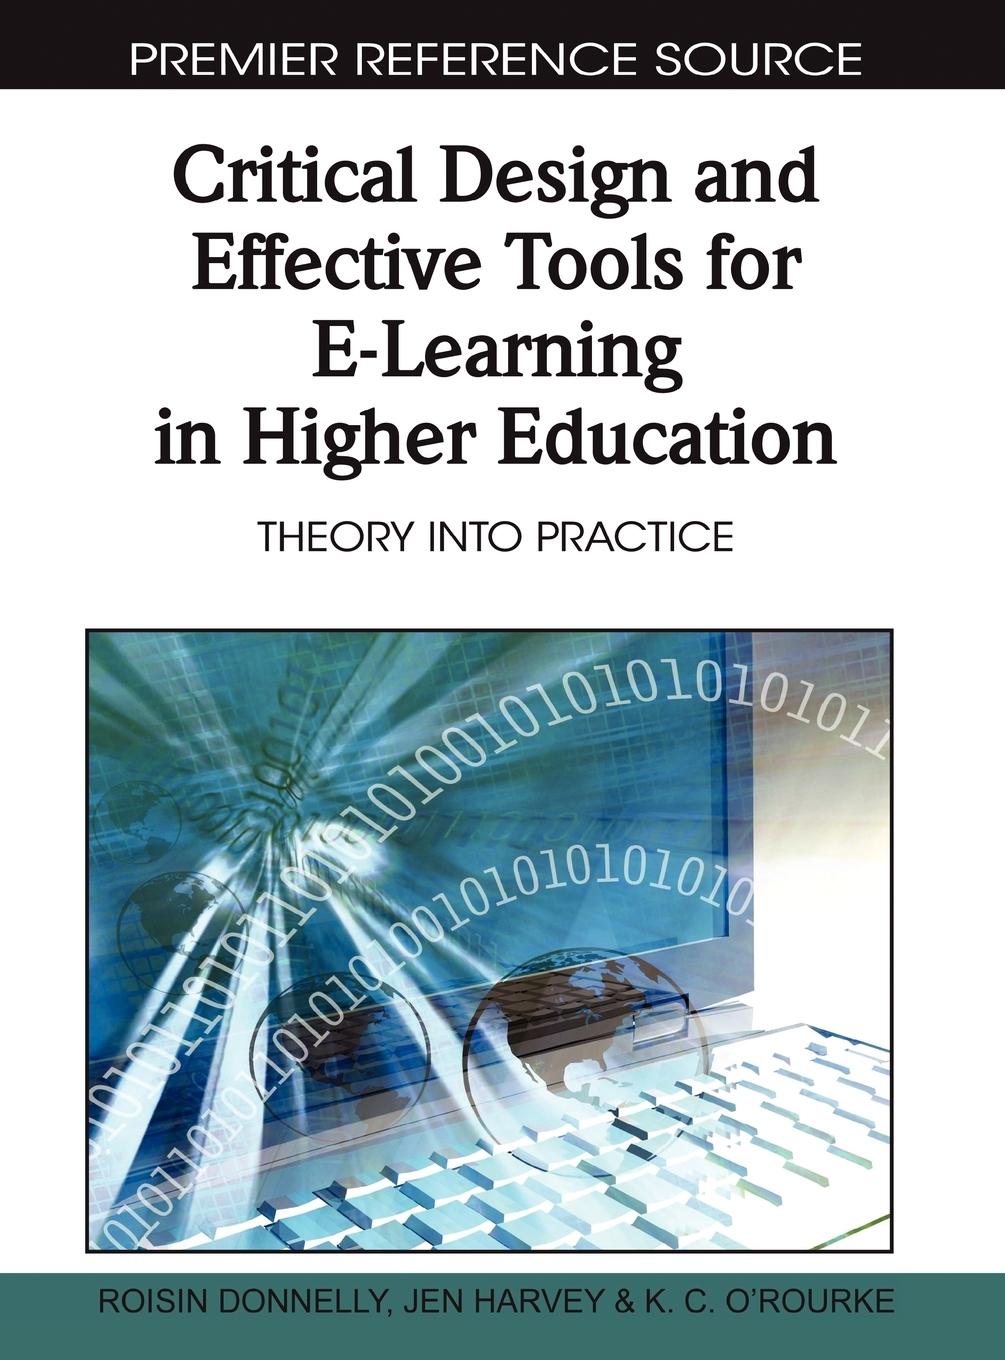 Critical Design and Effective Tools for E-Learning in Higher Education  Theory into Practice  Kevin O'Rourke  Buch  HC gerader Rücken kaschiert  Englisch  2010  Information Science Reference - O'Rourke, Kevin